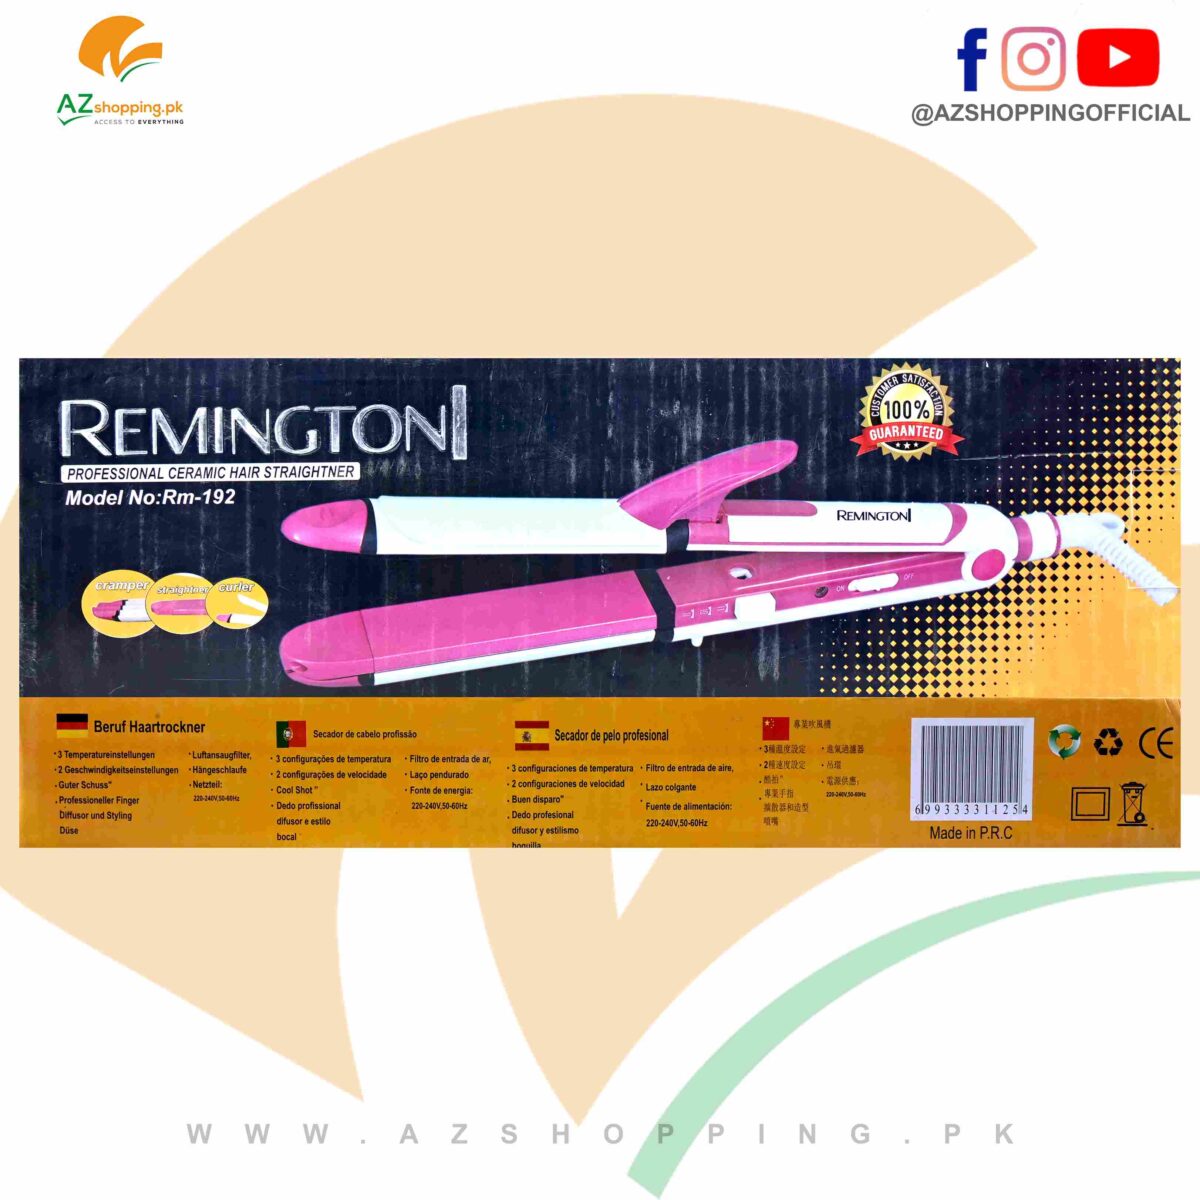 Remington – 3 in 1 Professional Ceramic Hair Straightener, Crimper, Curler Iron with Ceramic Coating Max Temperature 230℃, Dry / Wet, 100% Aluminum Sheet, On/Off Switch, Power Indicator, 360 Degree Swivel Cord – Model No-RM-192